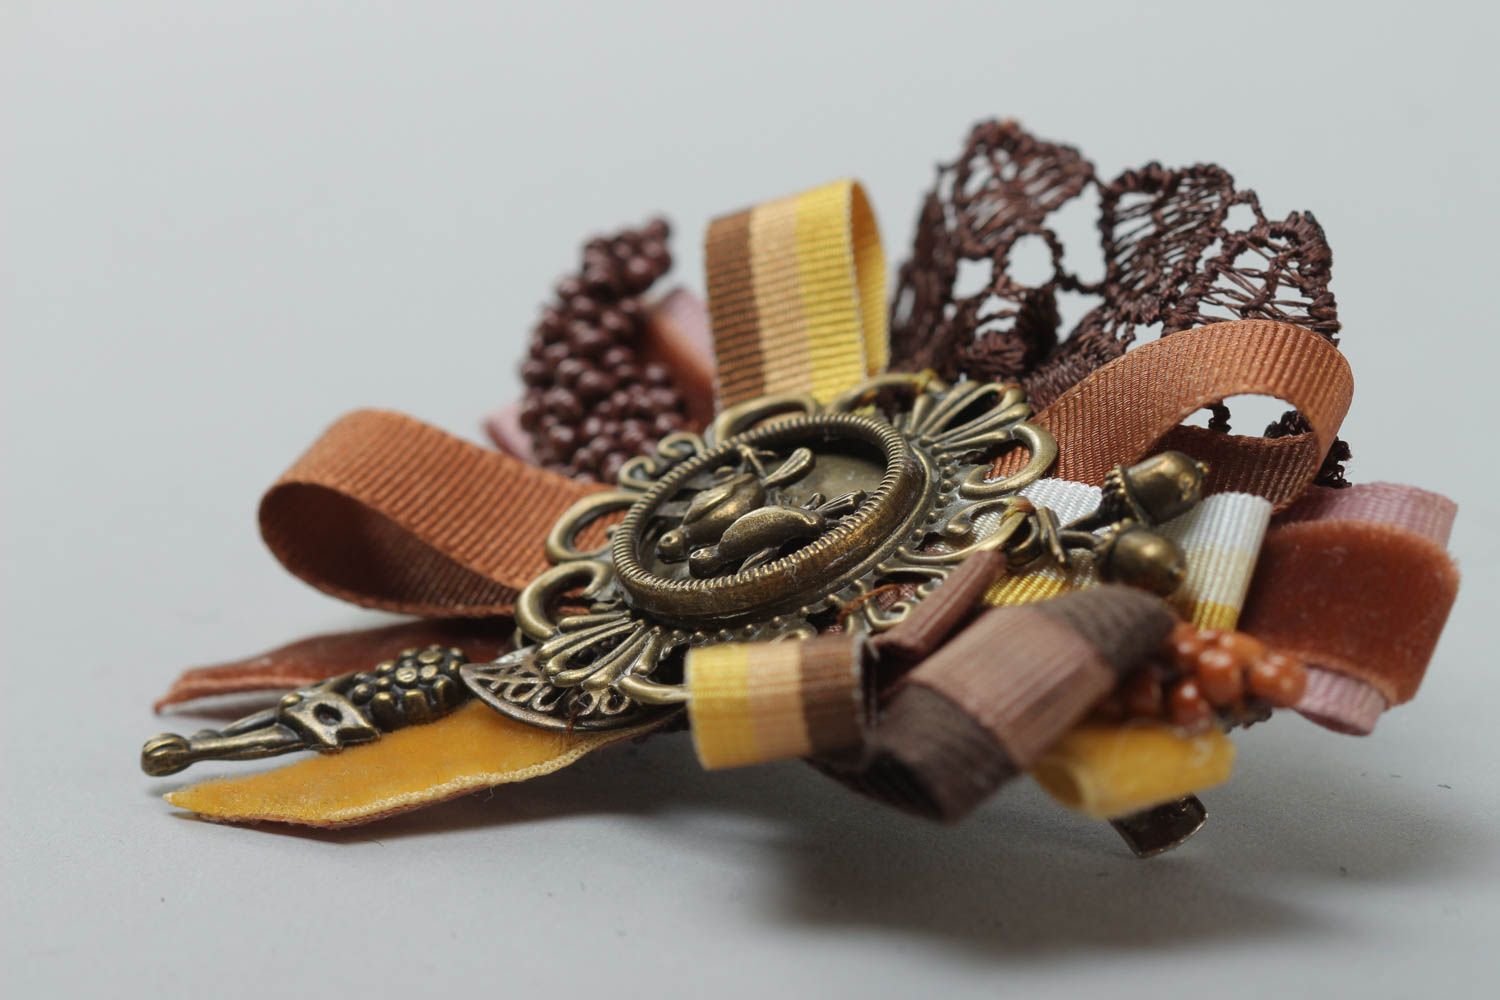 Handmade rep ribbon brooch with lace and charms in brown color palette photo 3